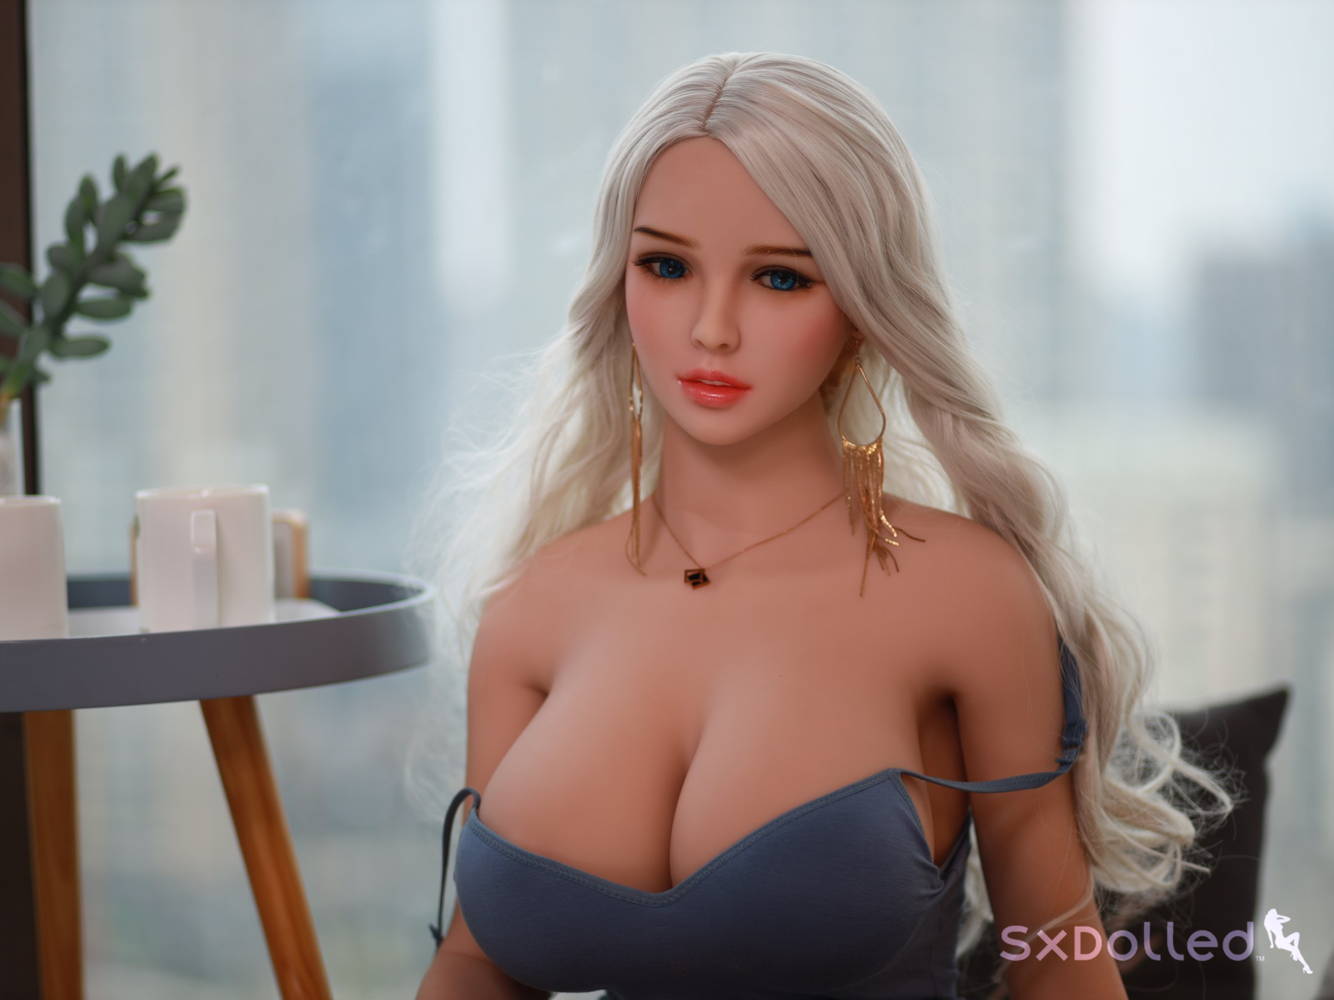 4 Safety Tips to Avoid Damaging Your Sex Doll | SxDolled